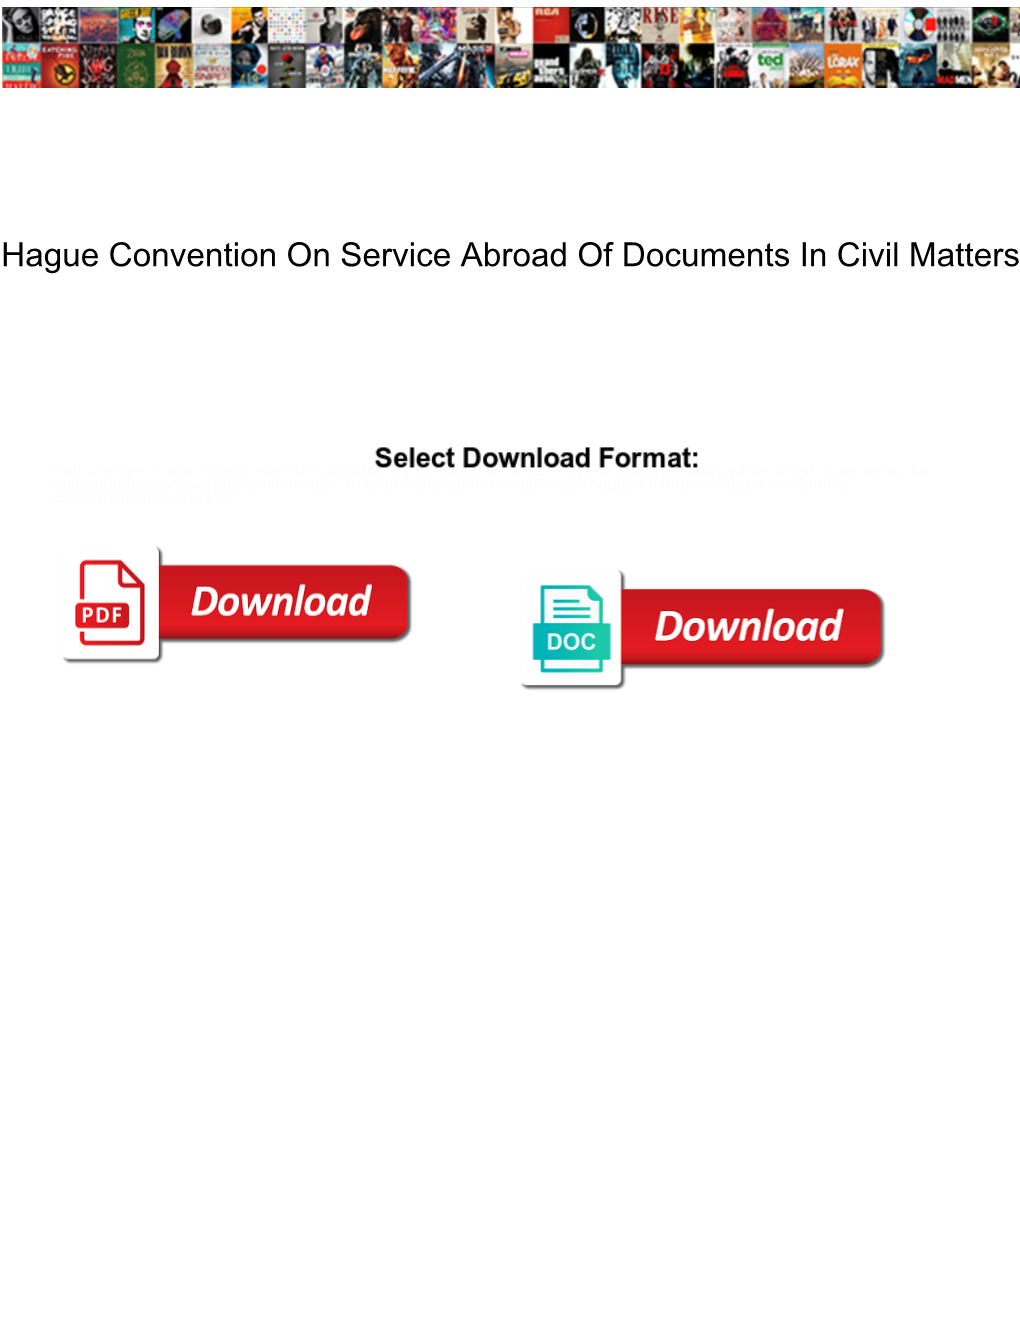 Hague Convention on Service Abroad of Documents in Civil Matters